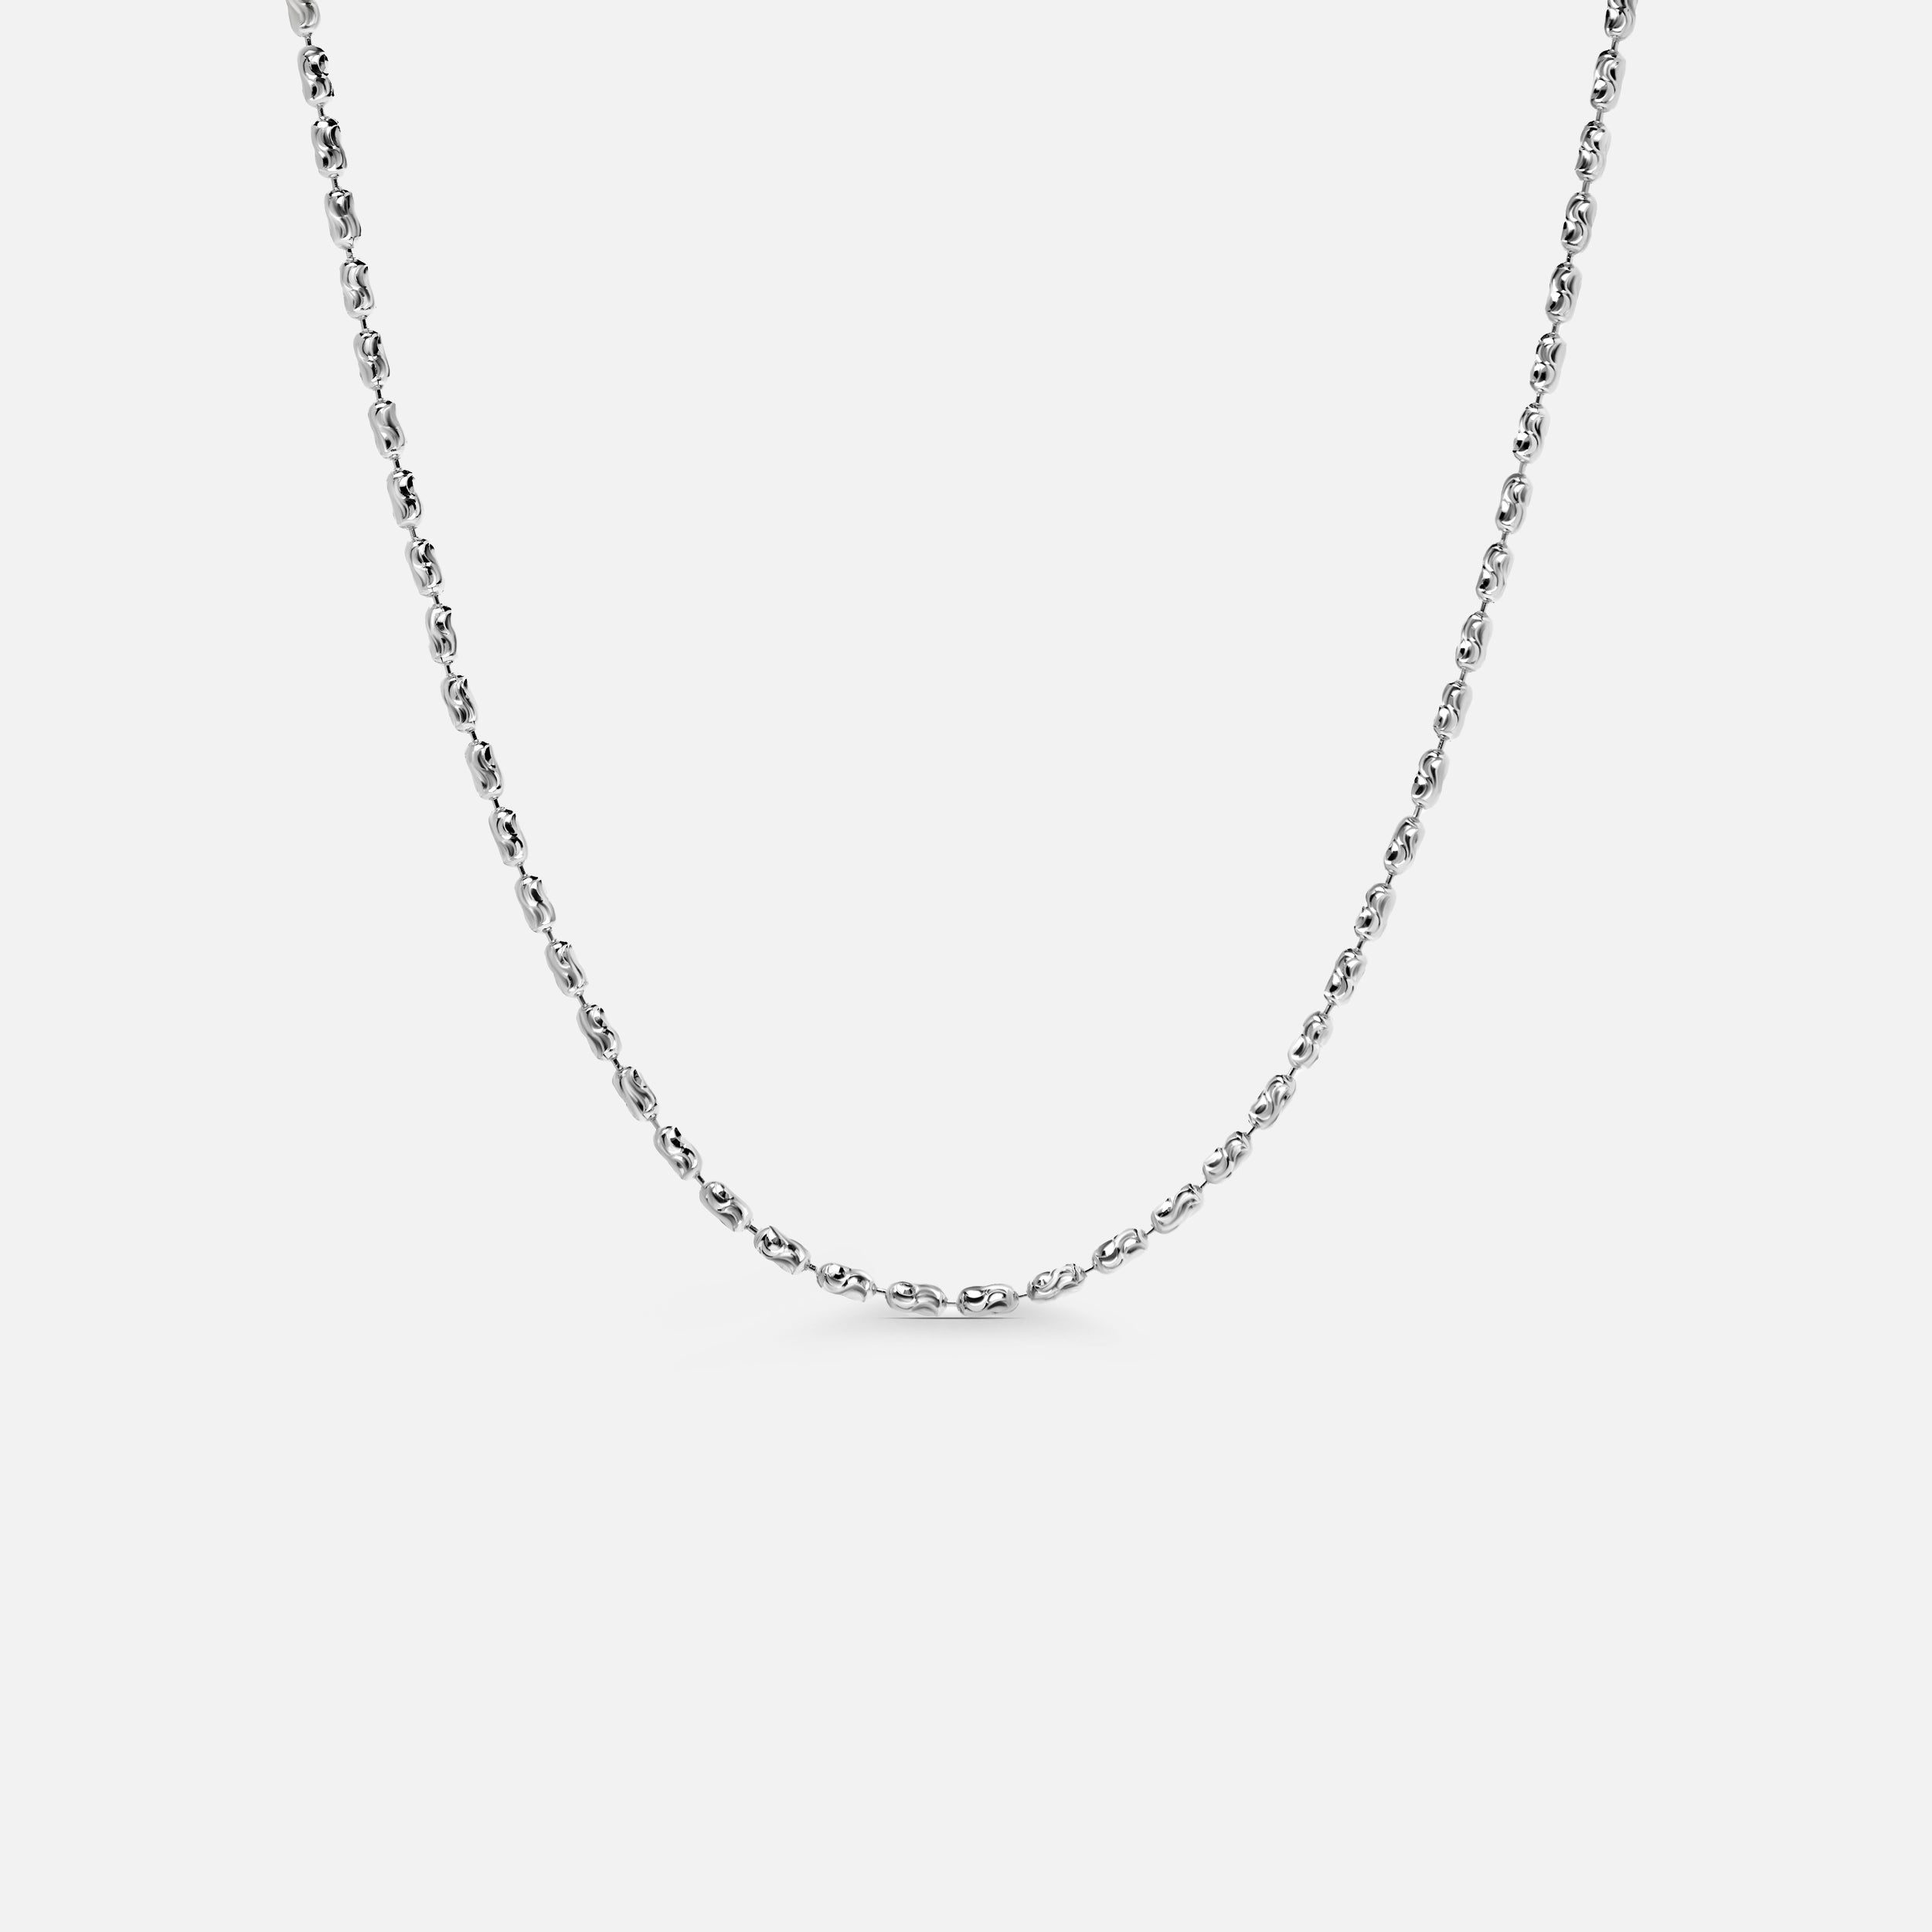 Silver Droplets chain